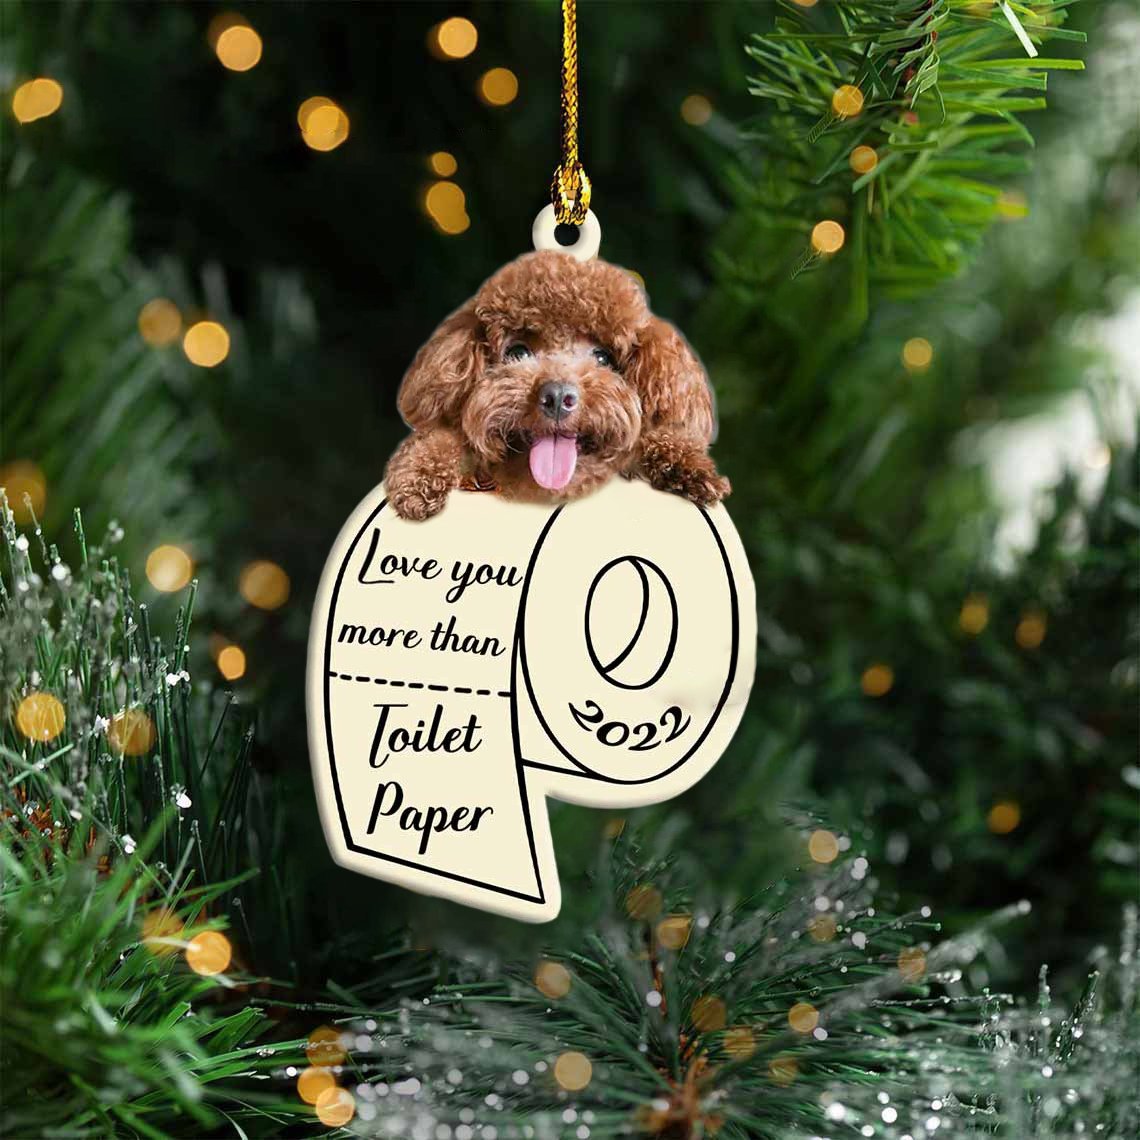 Poodle Love You More Than Toilet Paper 2022 Hanging Ornament